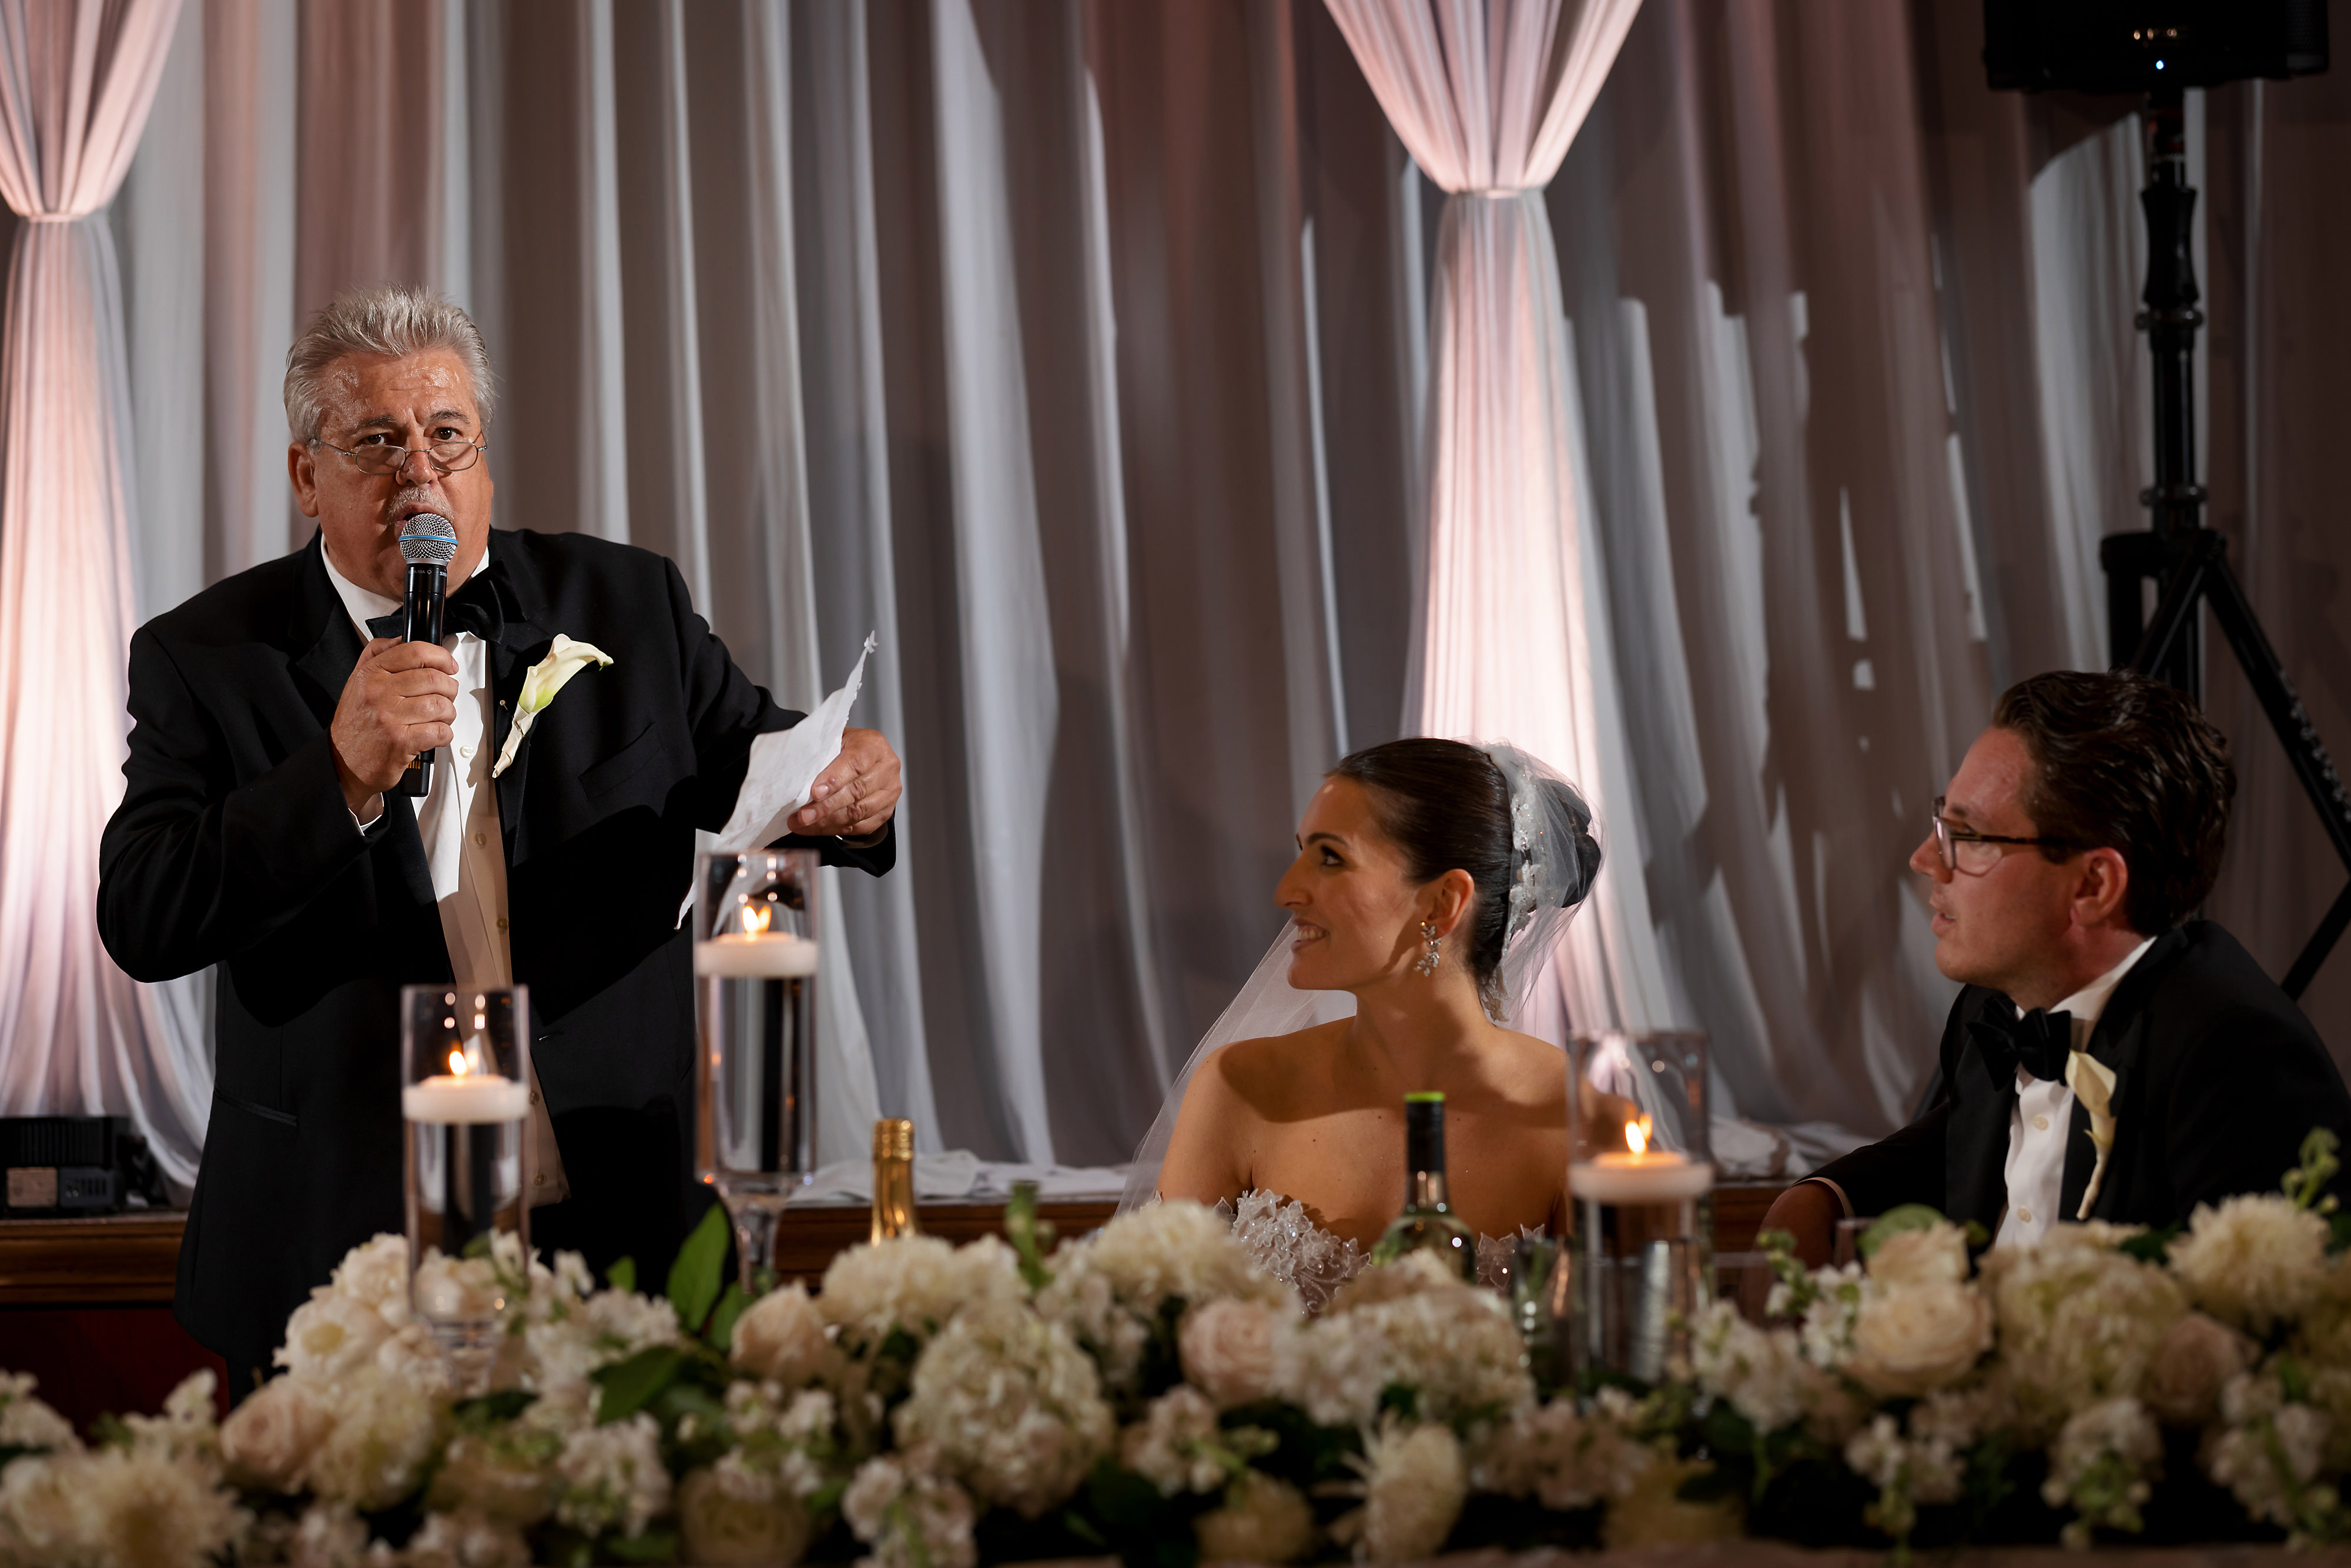 father of groom toast during wedding reception at Halls of St. George in Schererville, Indiana